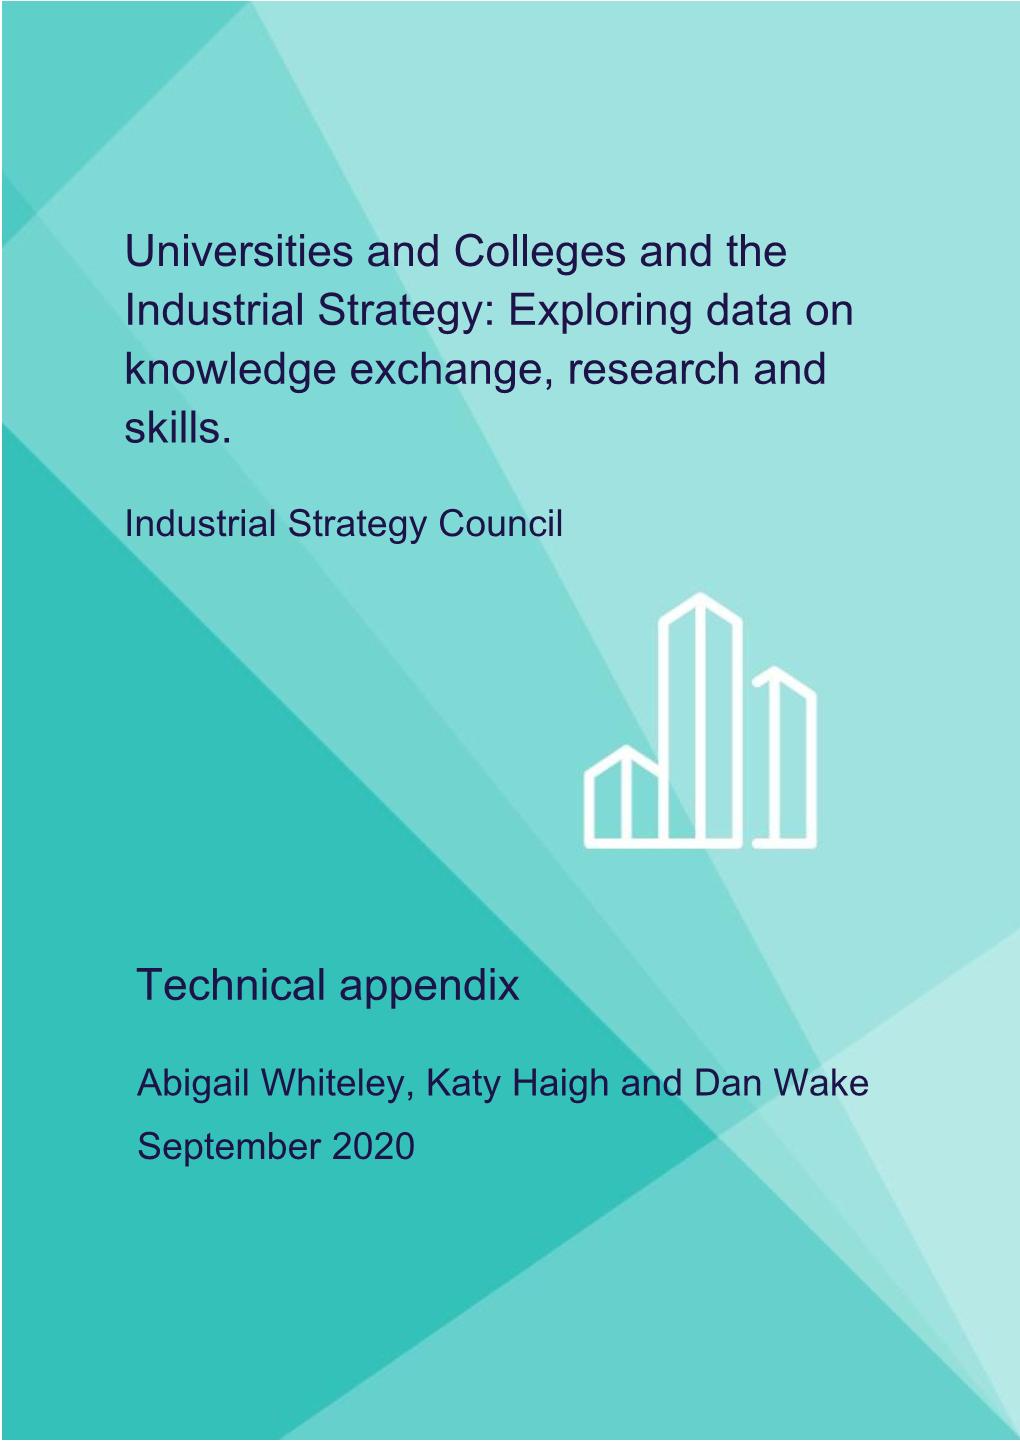 Universities and Colleges and the Industrial Strategy